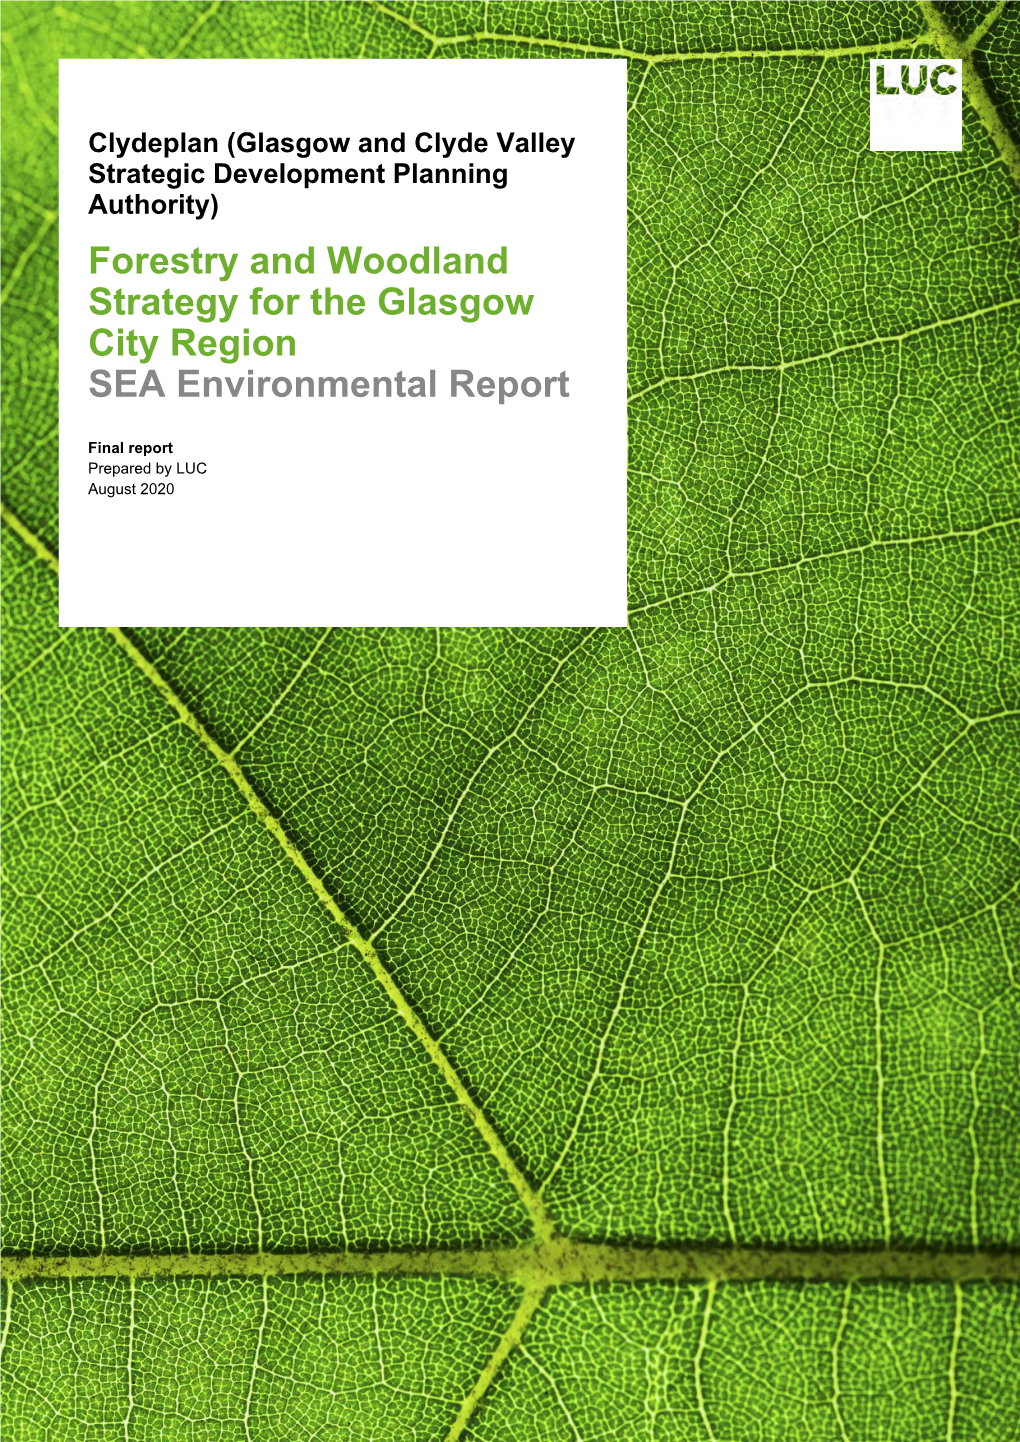 Forestry and Woodland Strategy for the Glasgow City Region X SEA Environmental Report